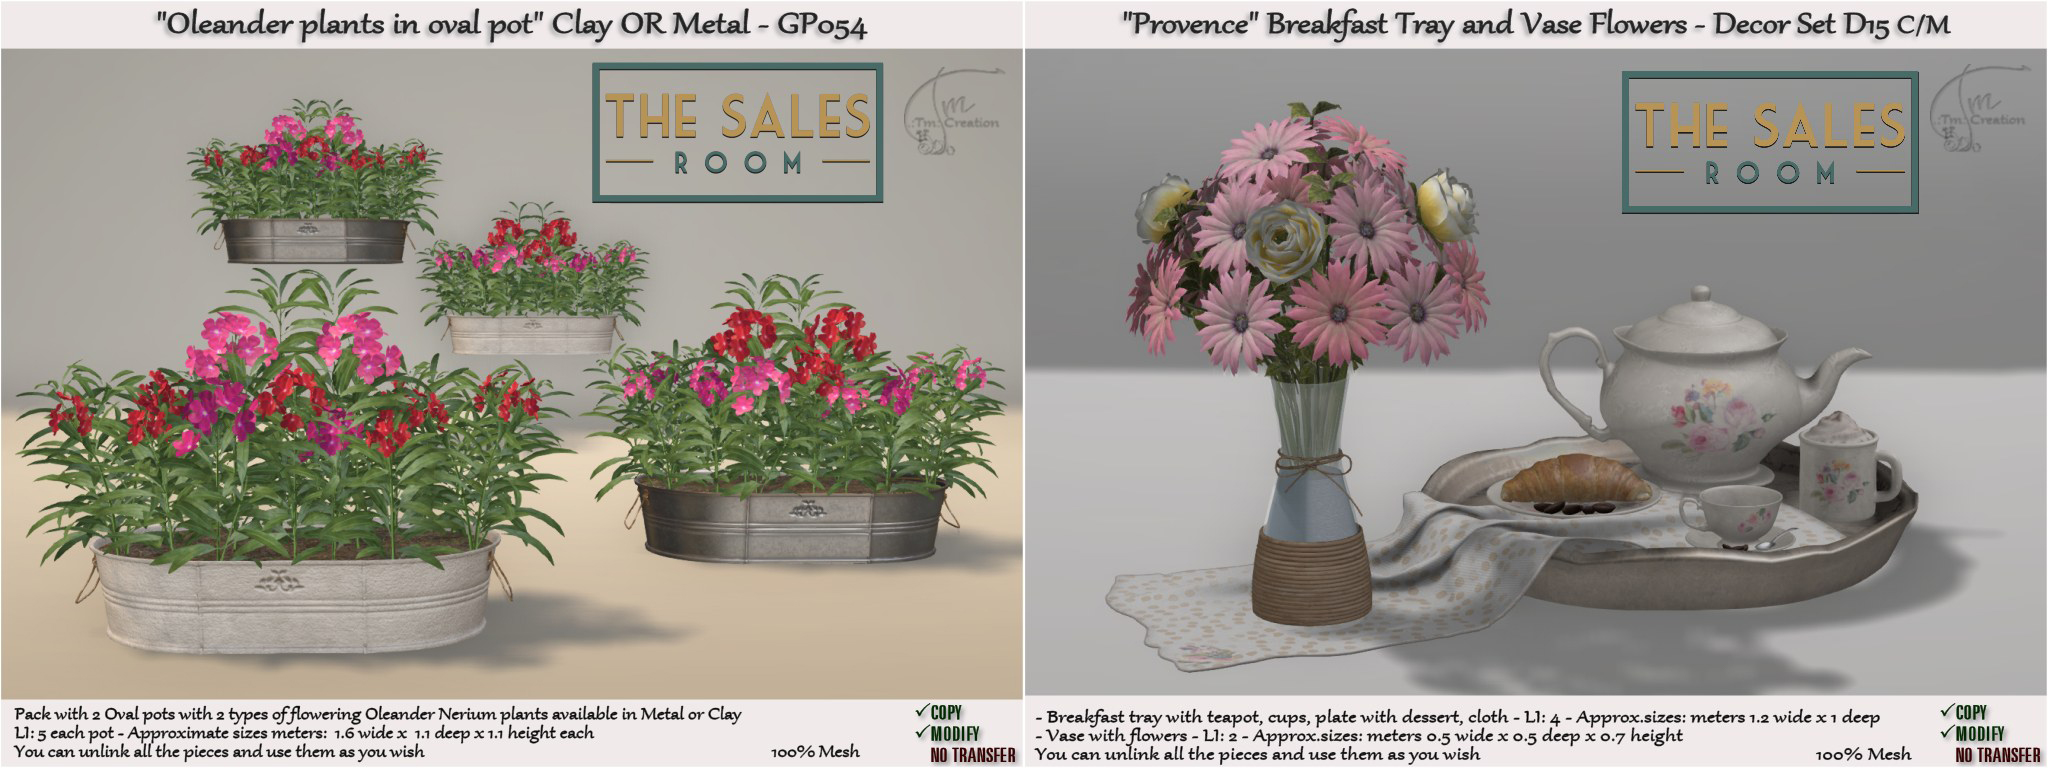 TM Creation – “Provence” Breakfast Tray, Vase Flowers and “Oleander Plants In Oval Pot”